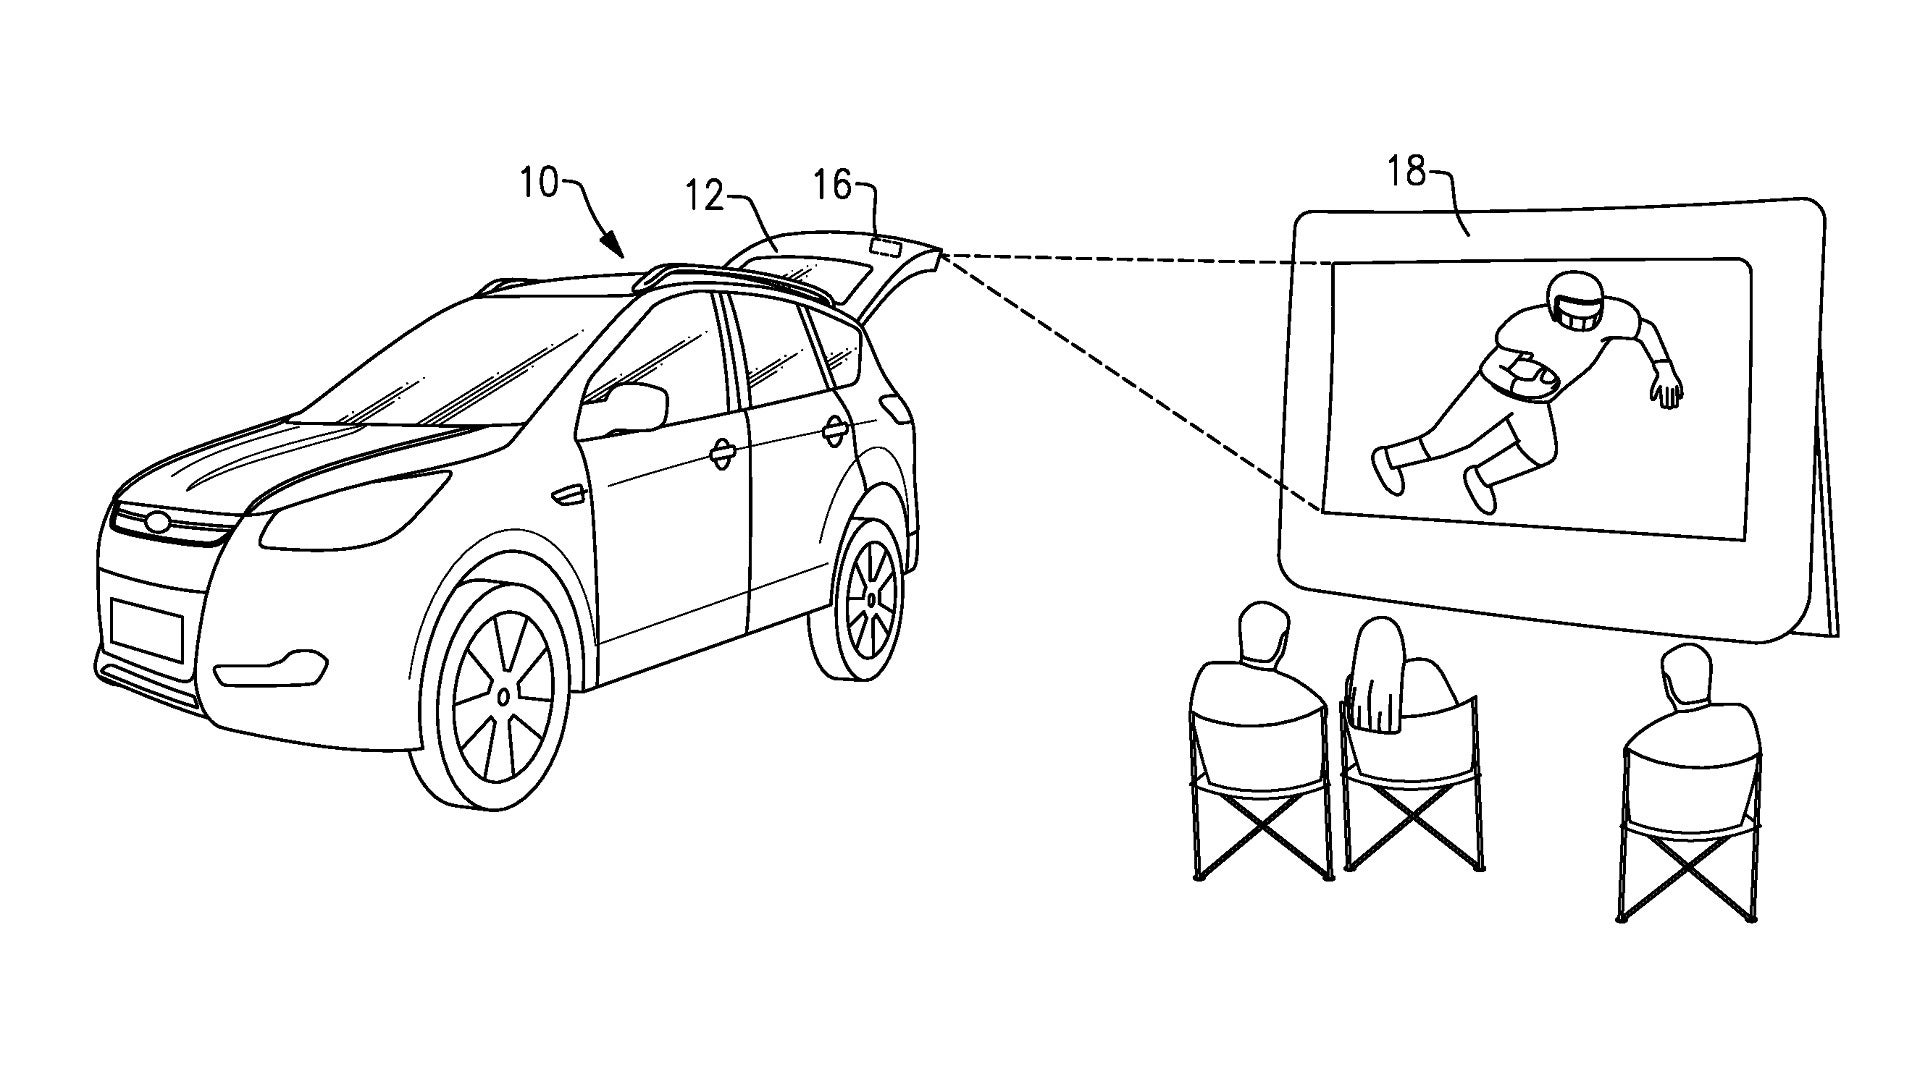 Ford Patents Idea for Building a Movie Projector into SUV Tailgates